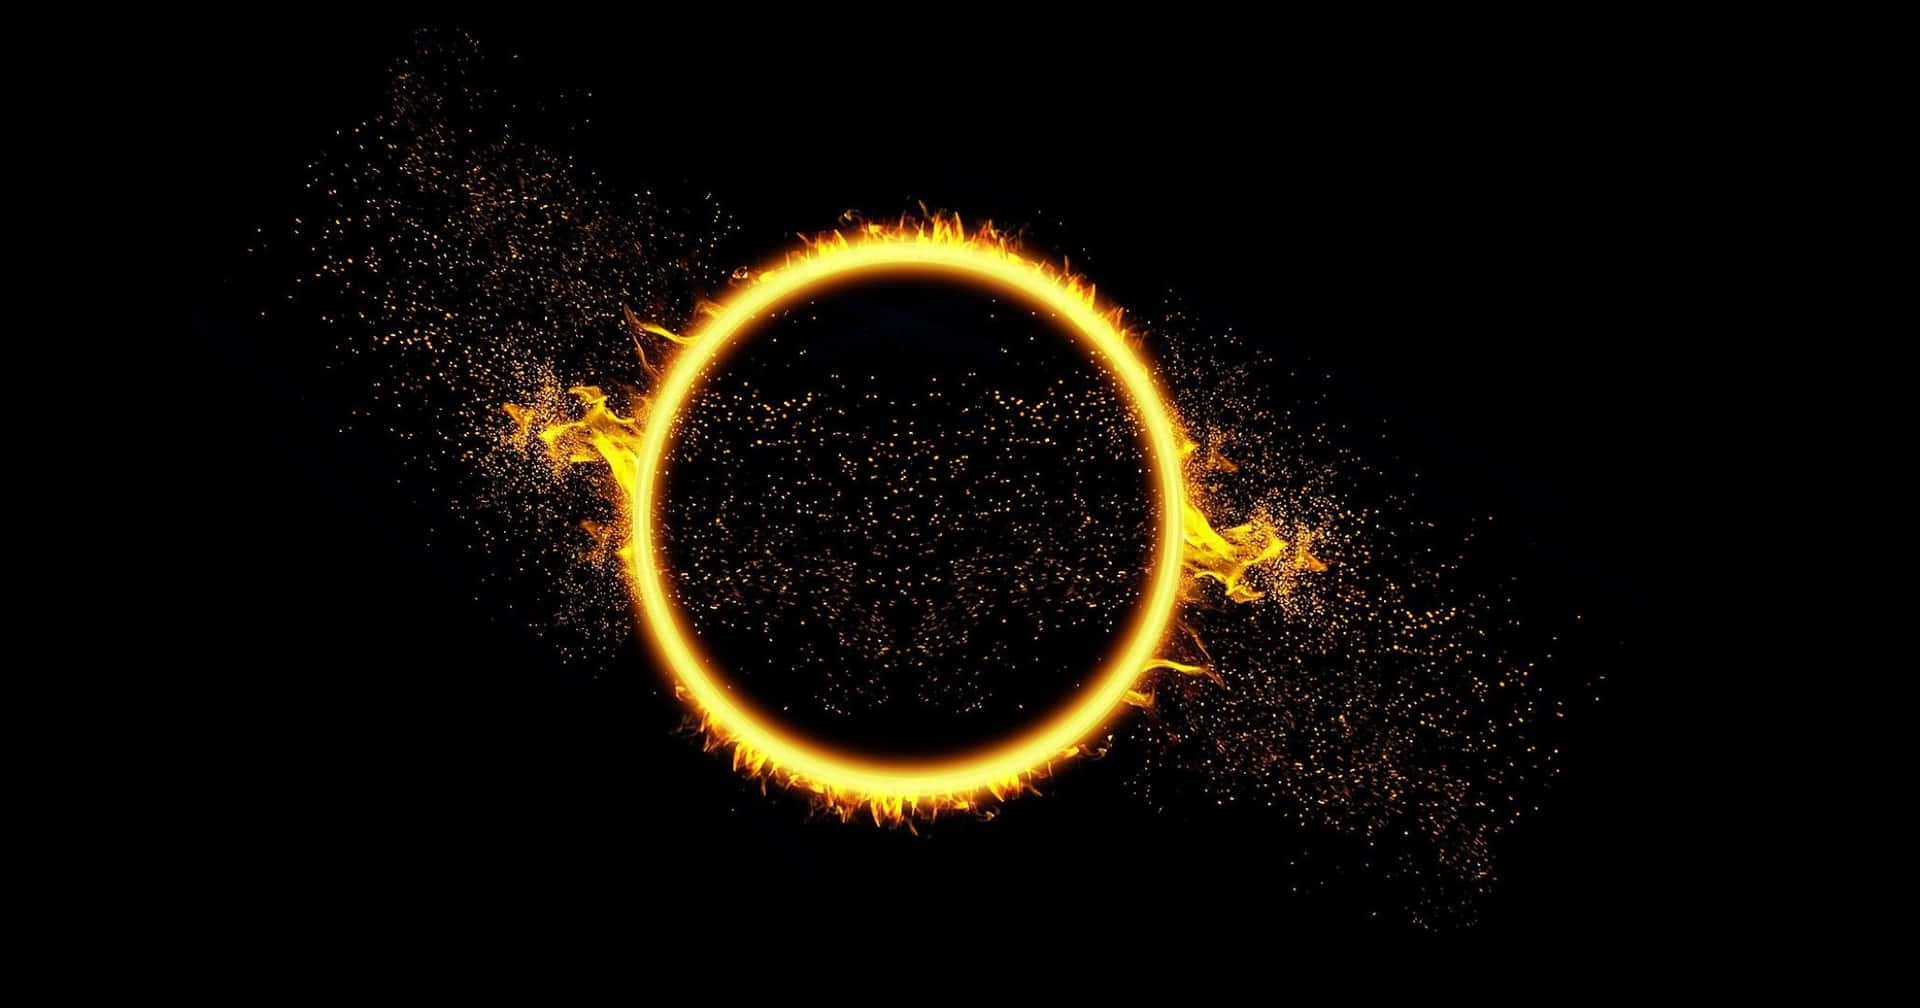 A Fire Ring On A Black Background